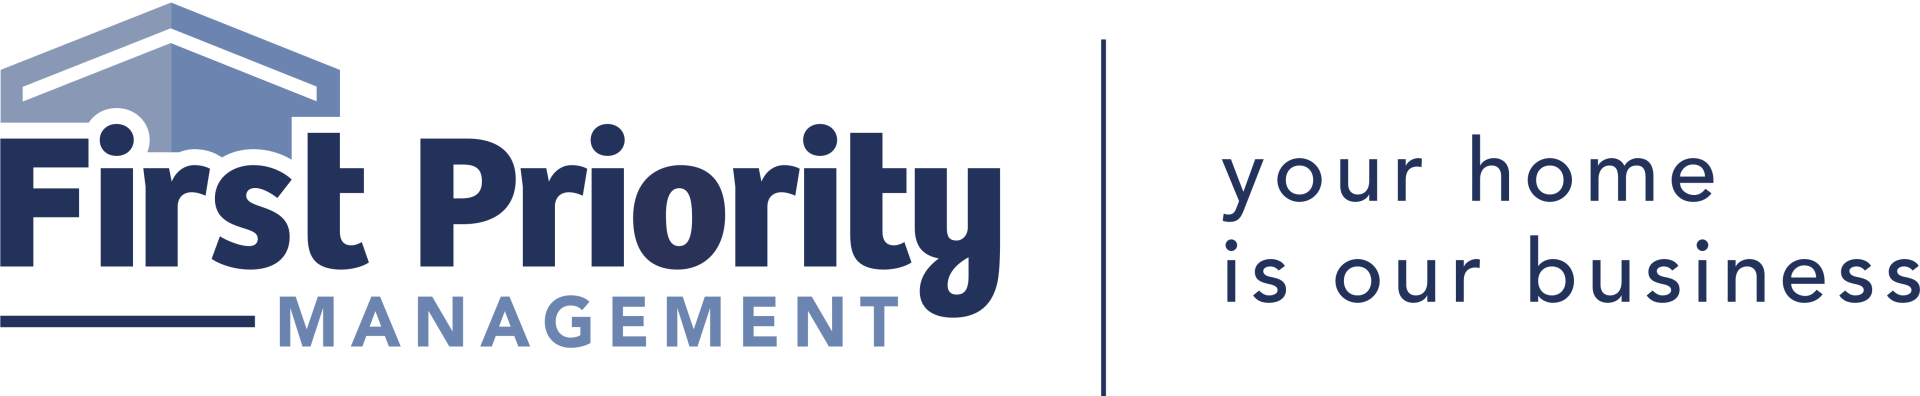 First Priority Management Logo